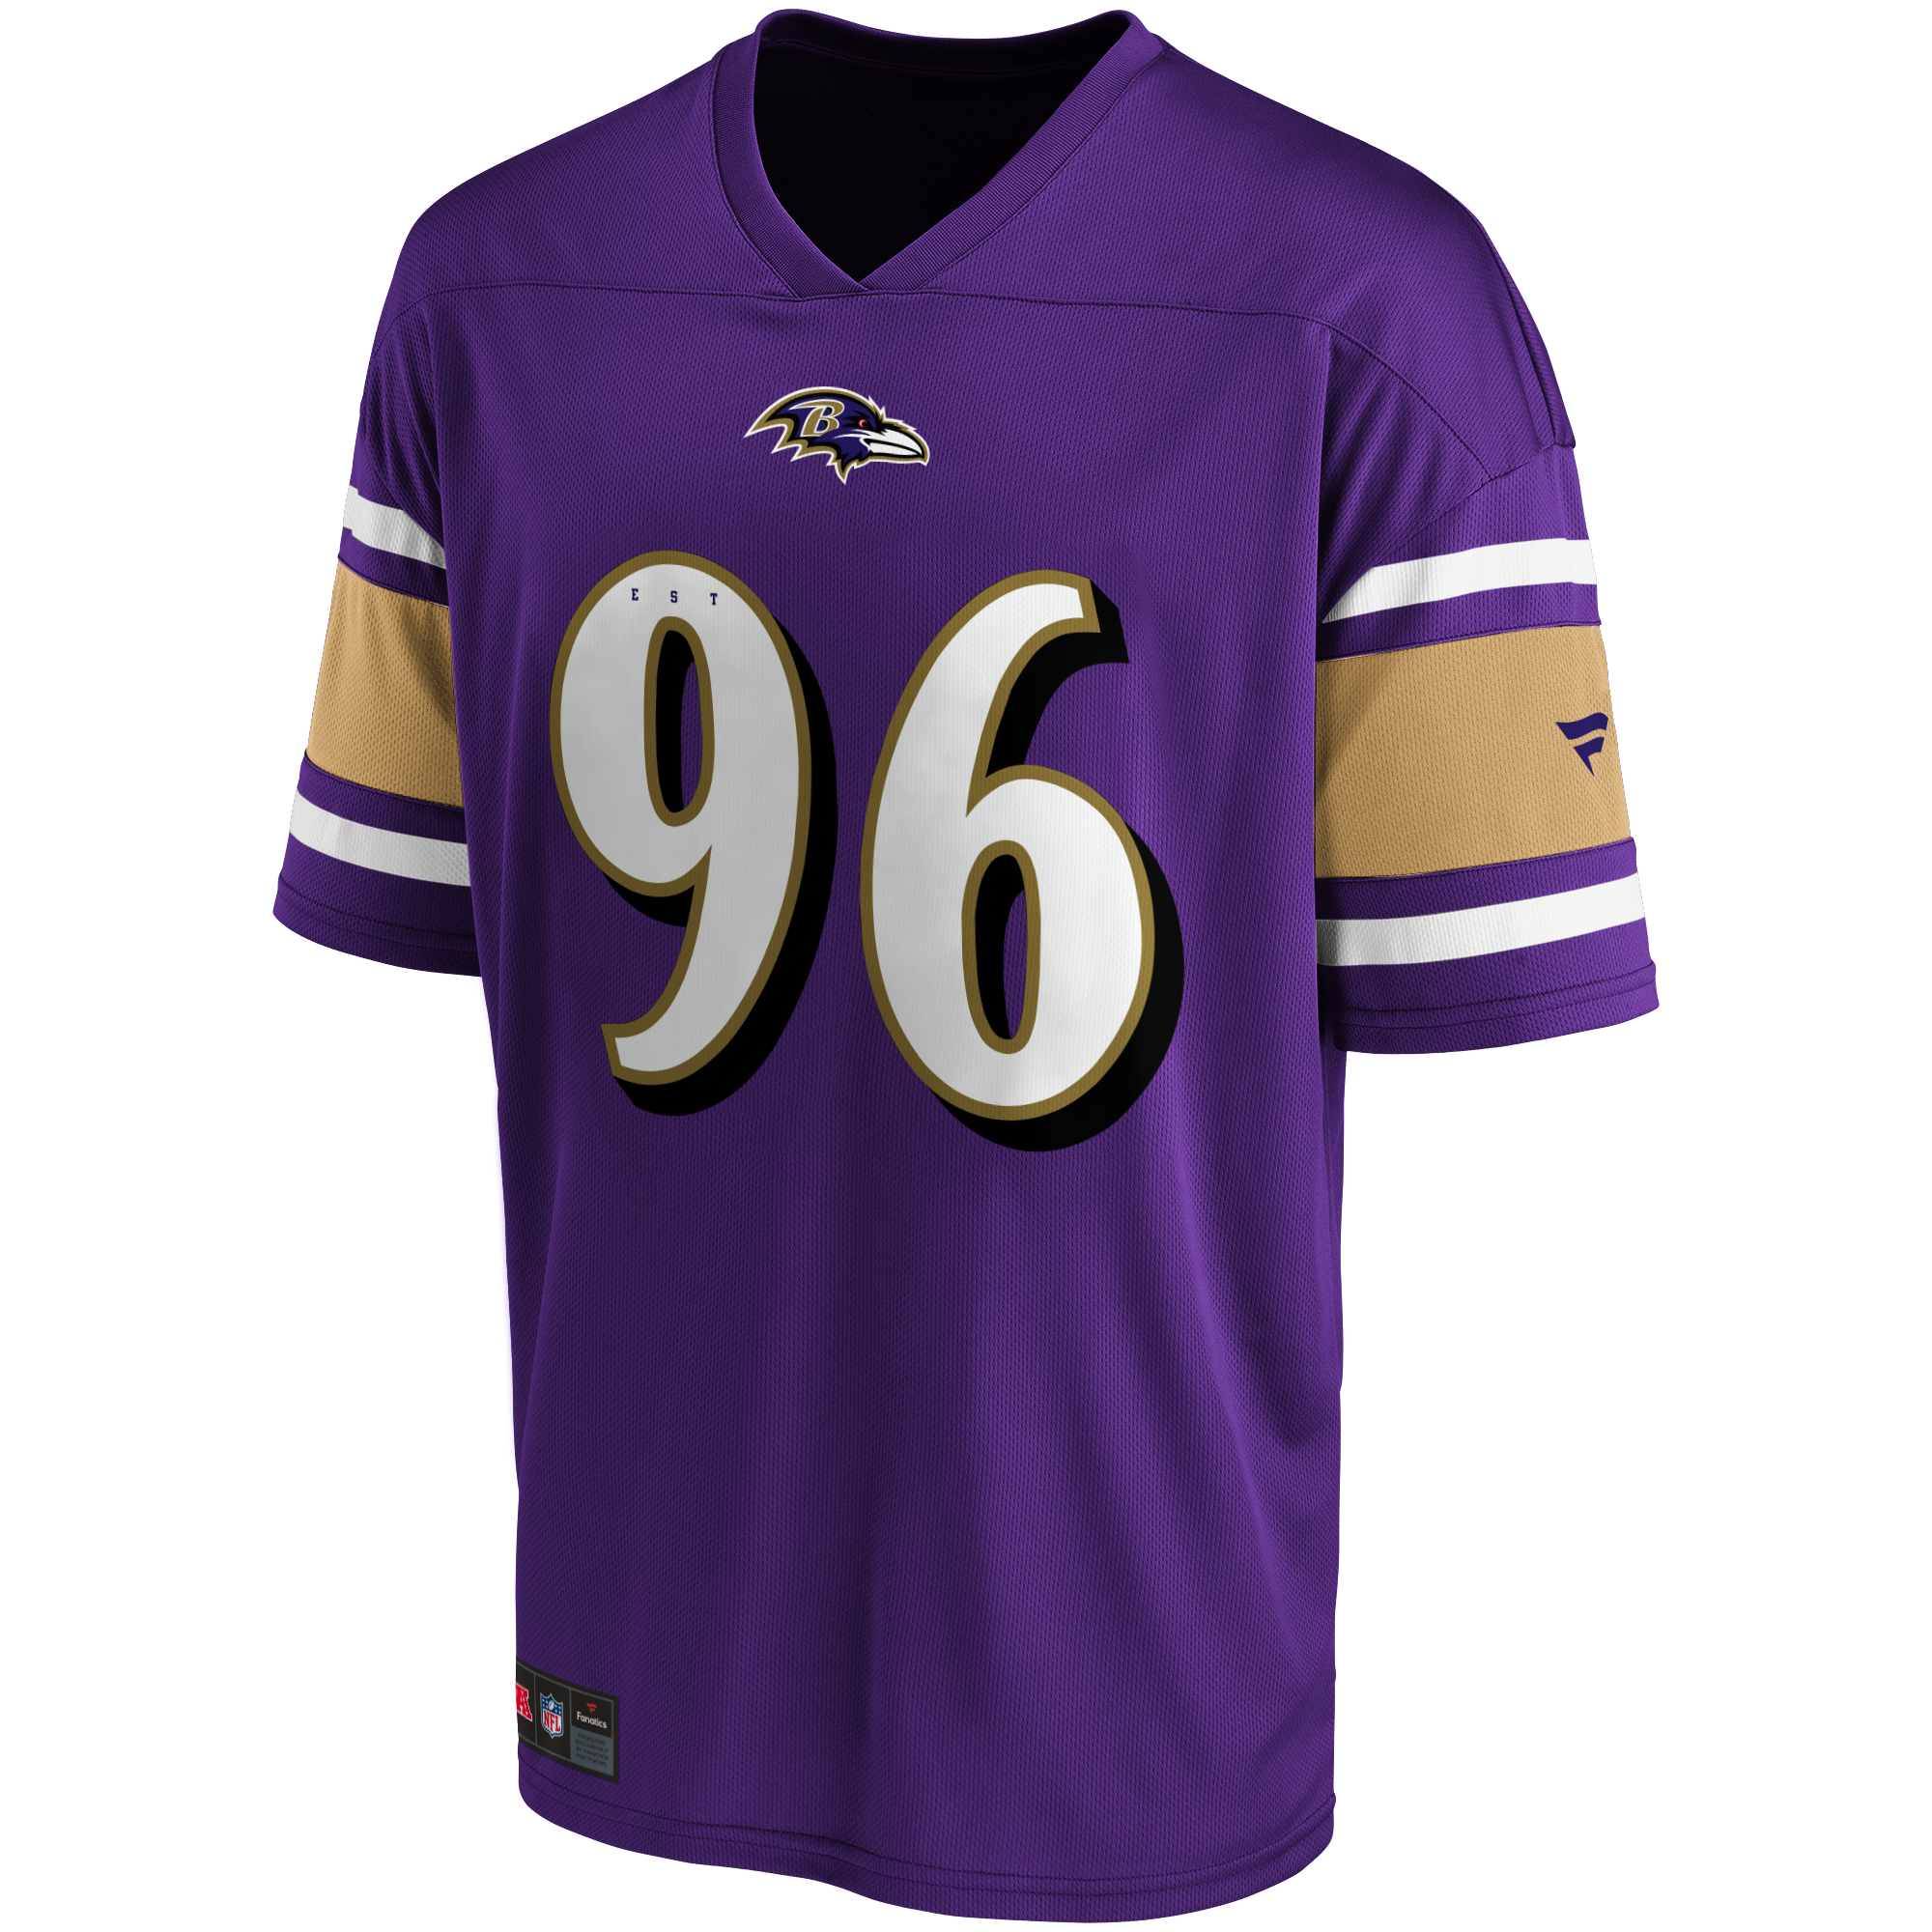 Baltimore Ravens Foundation Supporters Jersey